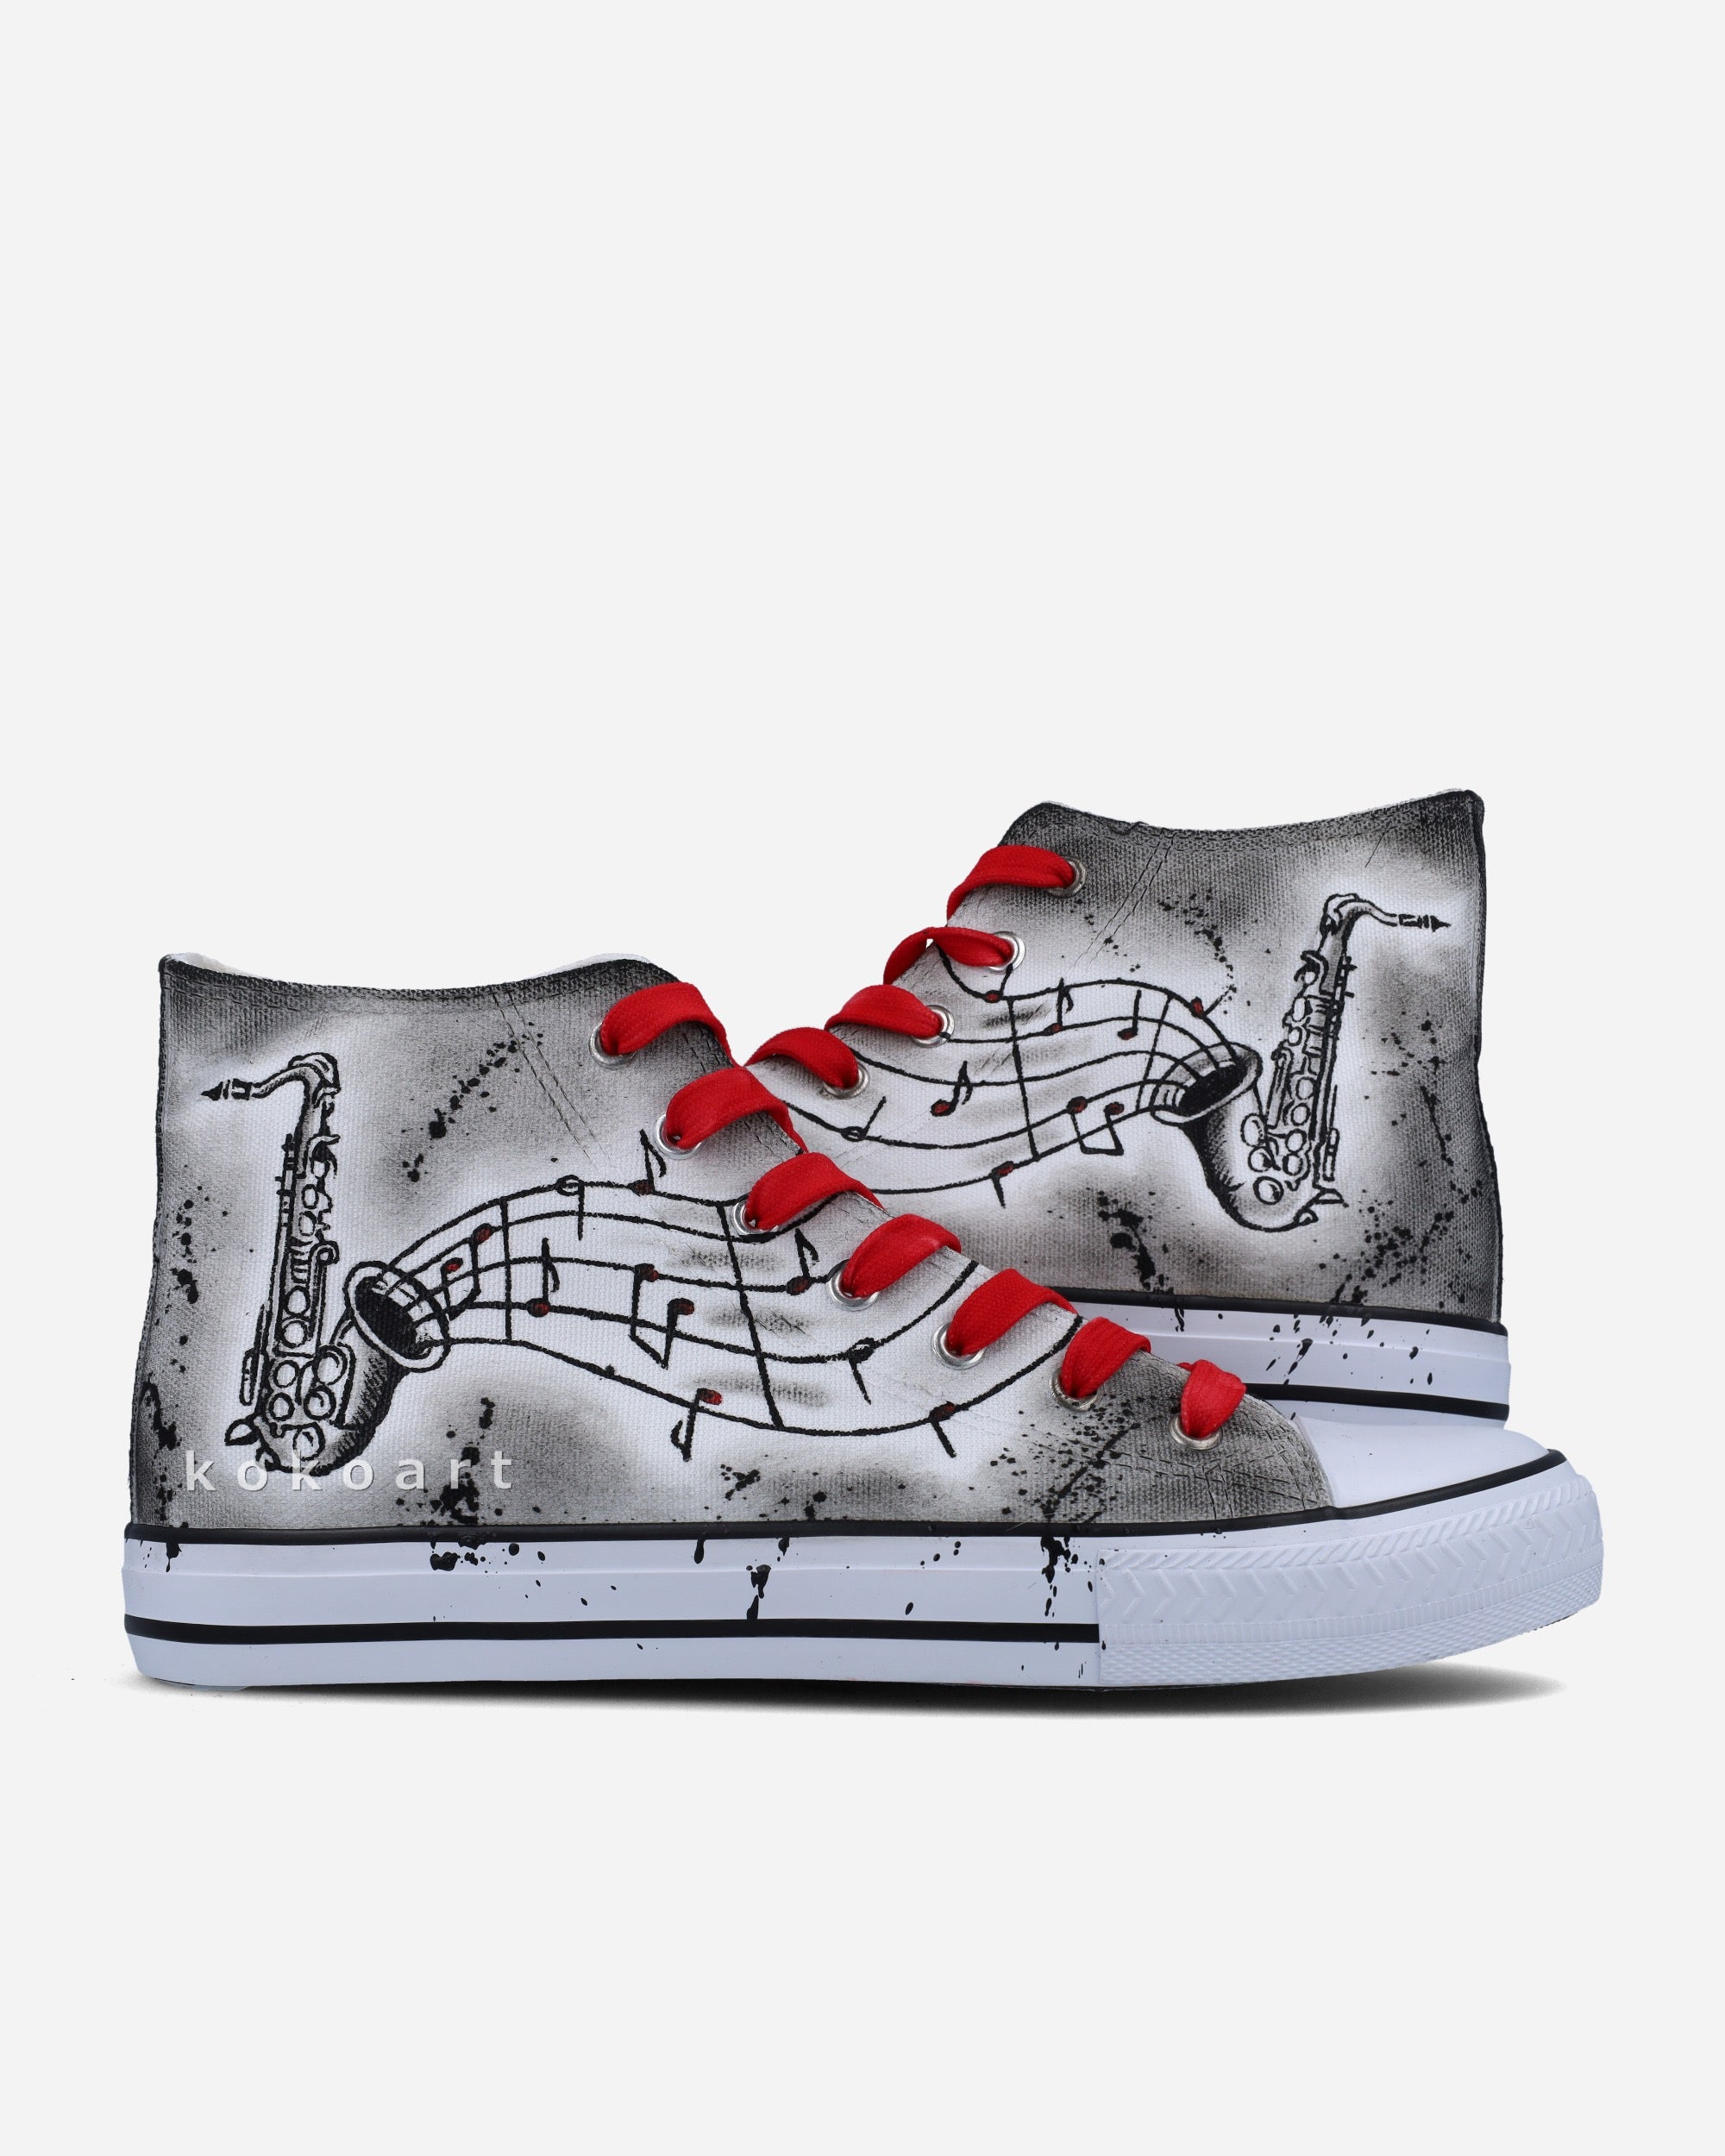 Saxophone Hand Painted Shoes